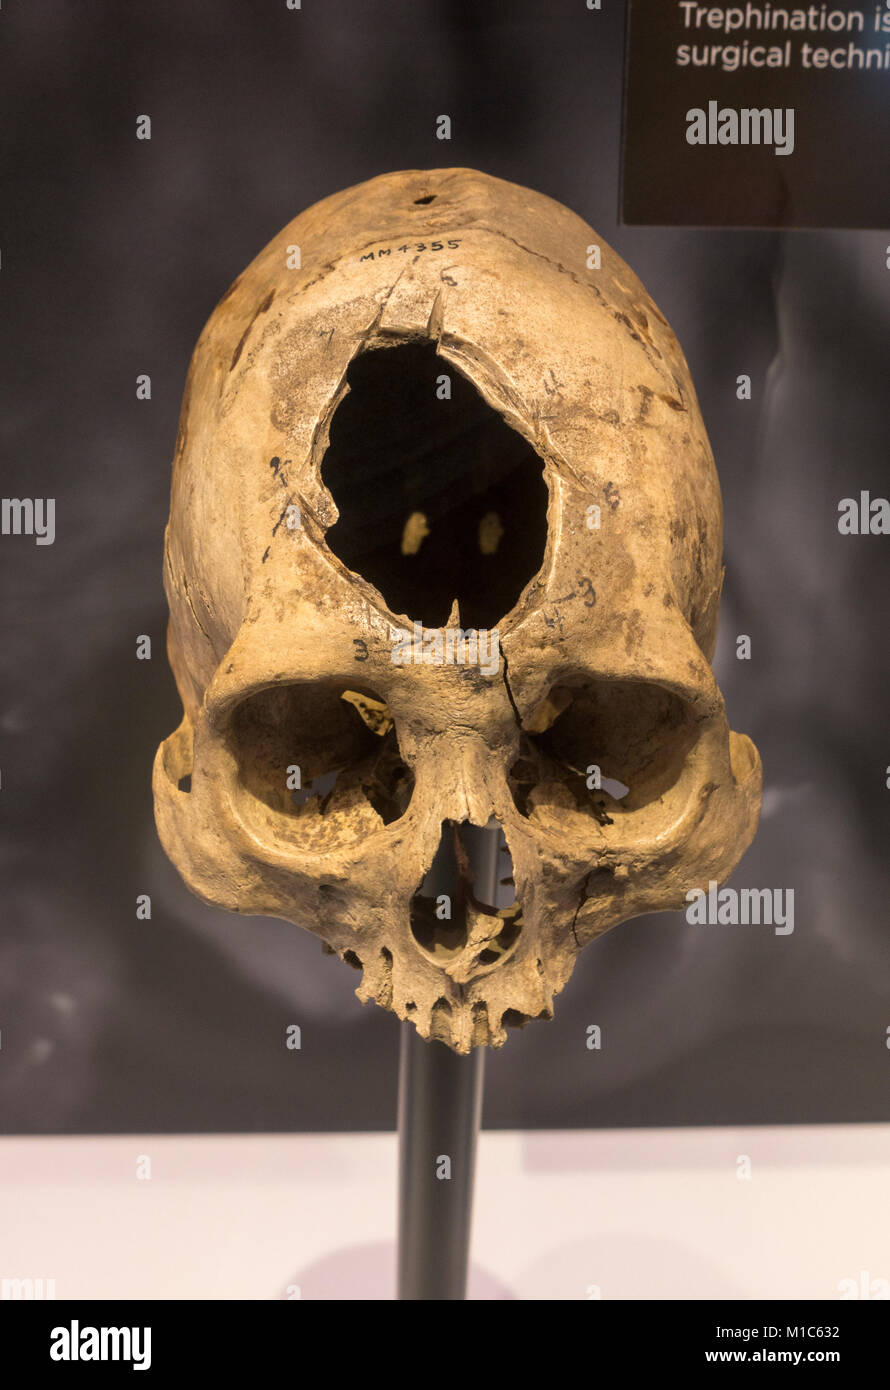 Cranial trephination, pre-Columbian Peru example on display in the National Museum of Health and Medicine, Silver Spring, MD, USA. Stock Photo